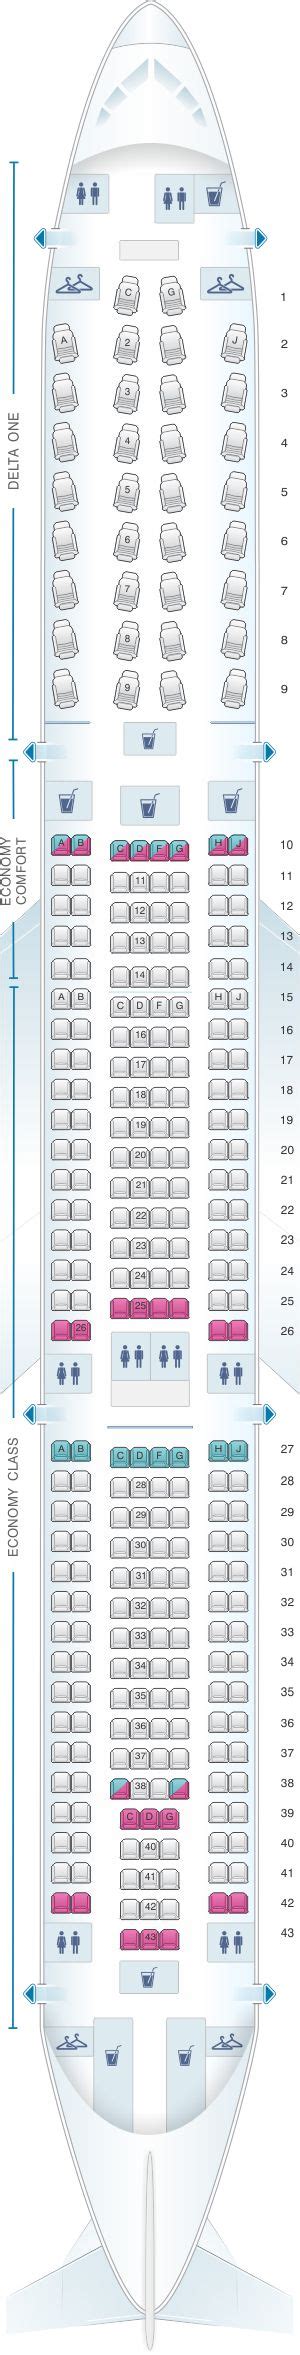 Seat Map Airbus A330 300 333 Boeing Air France Airbus